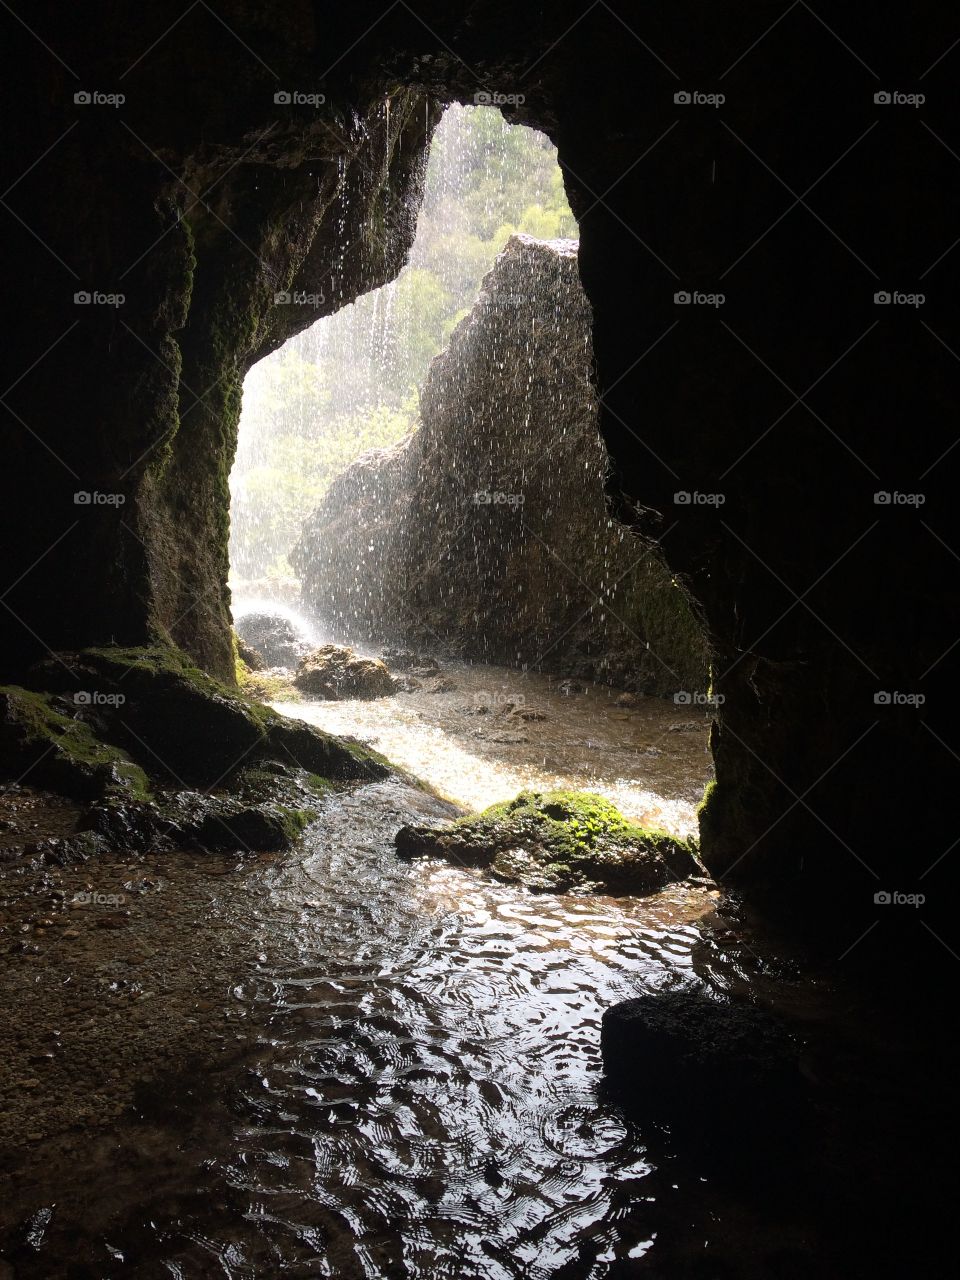 In the cave during the rain